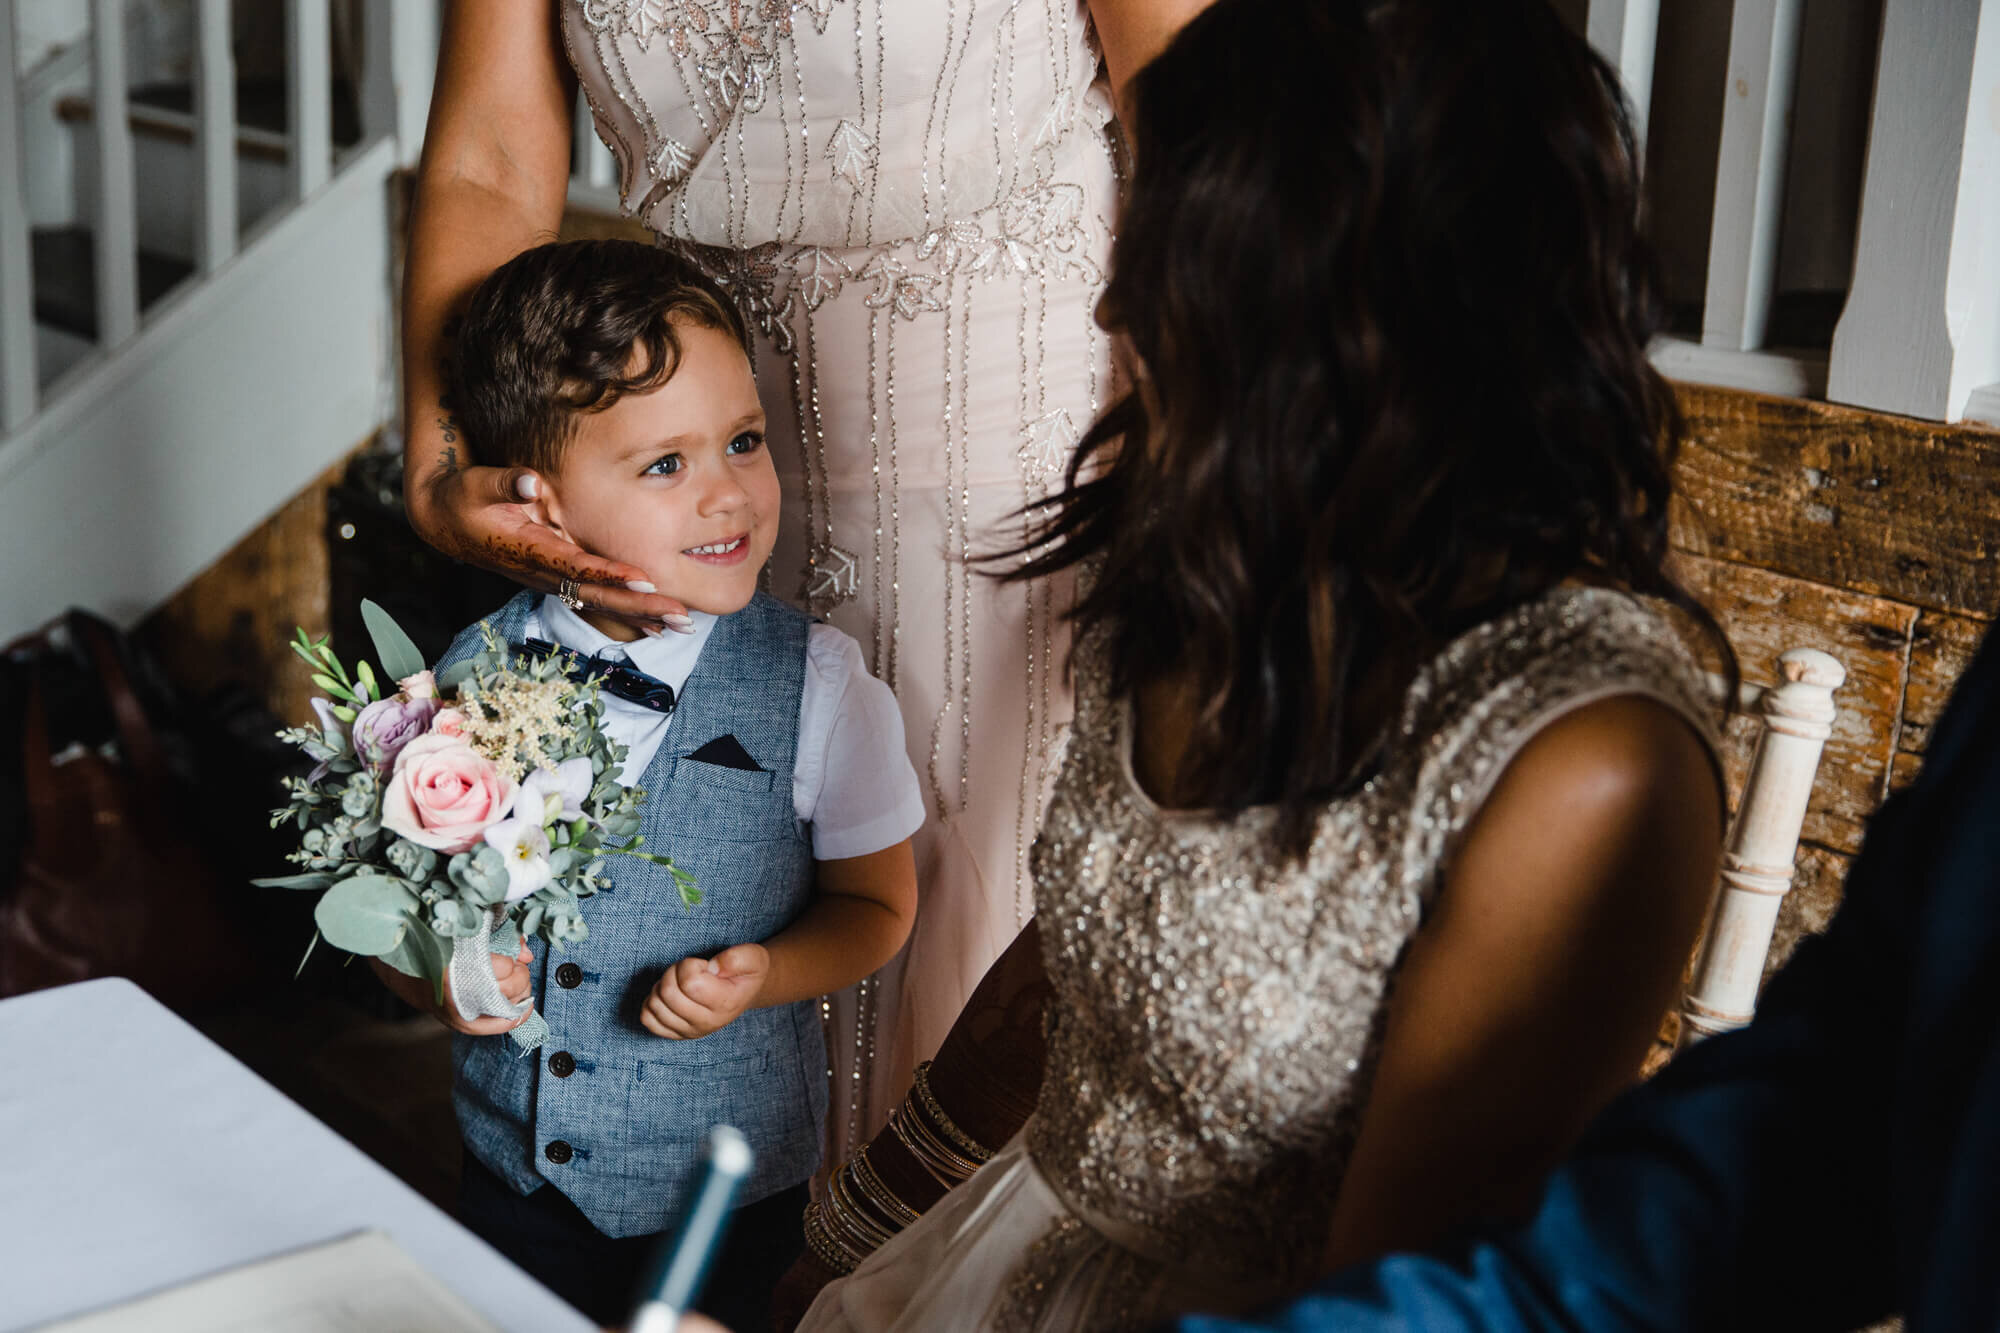 page boy holding bouquet while sharing moment with bride